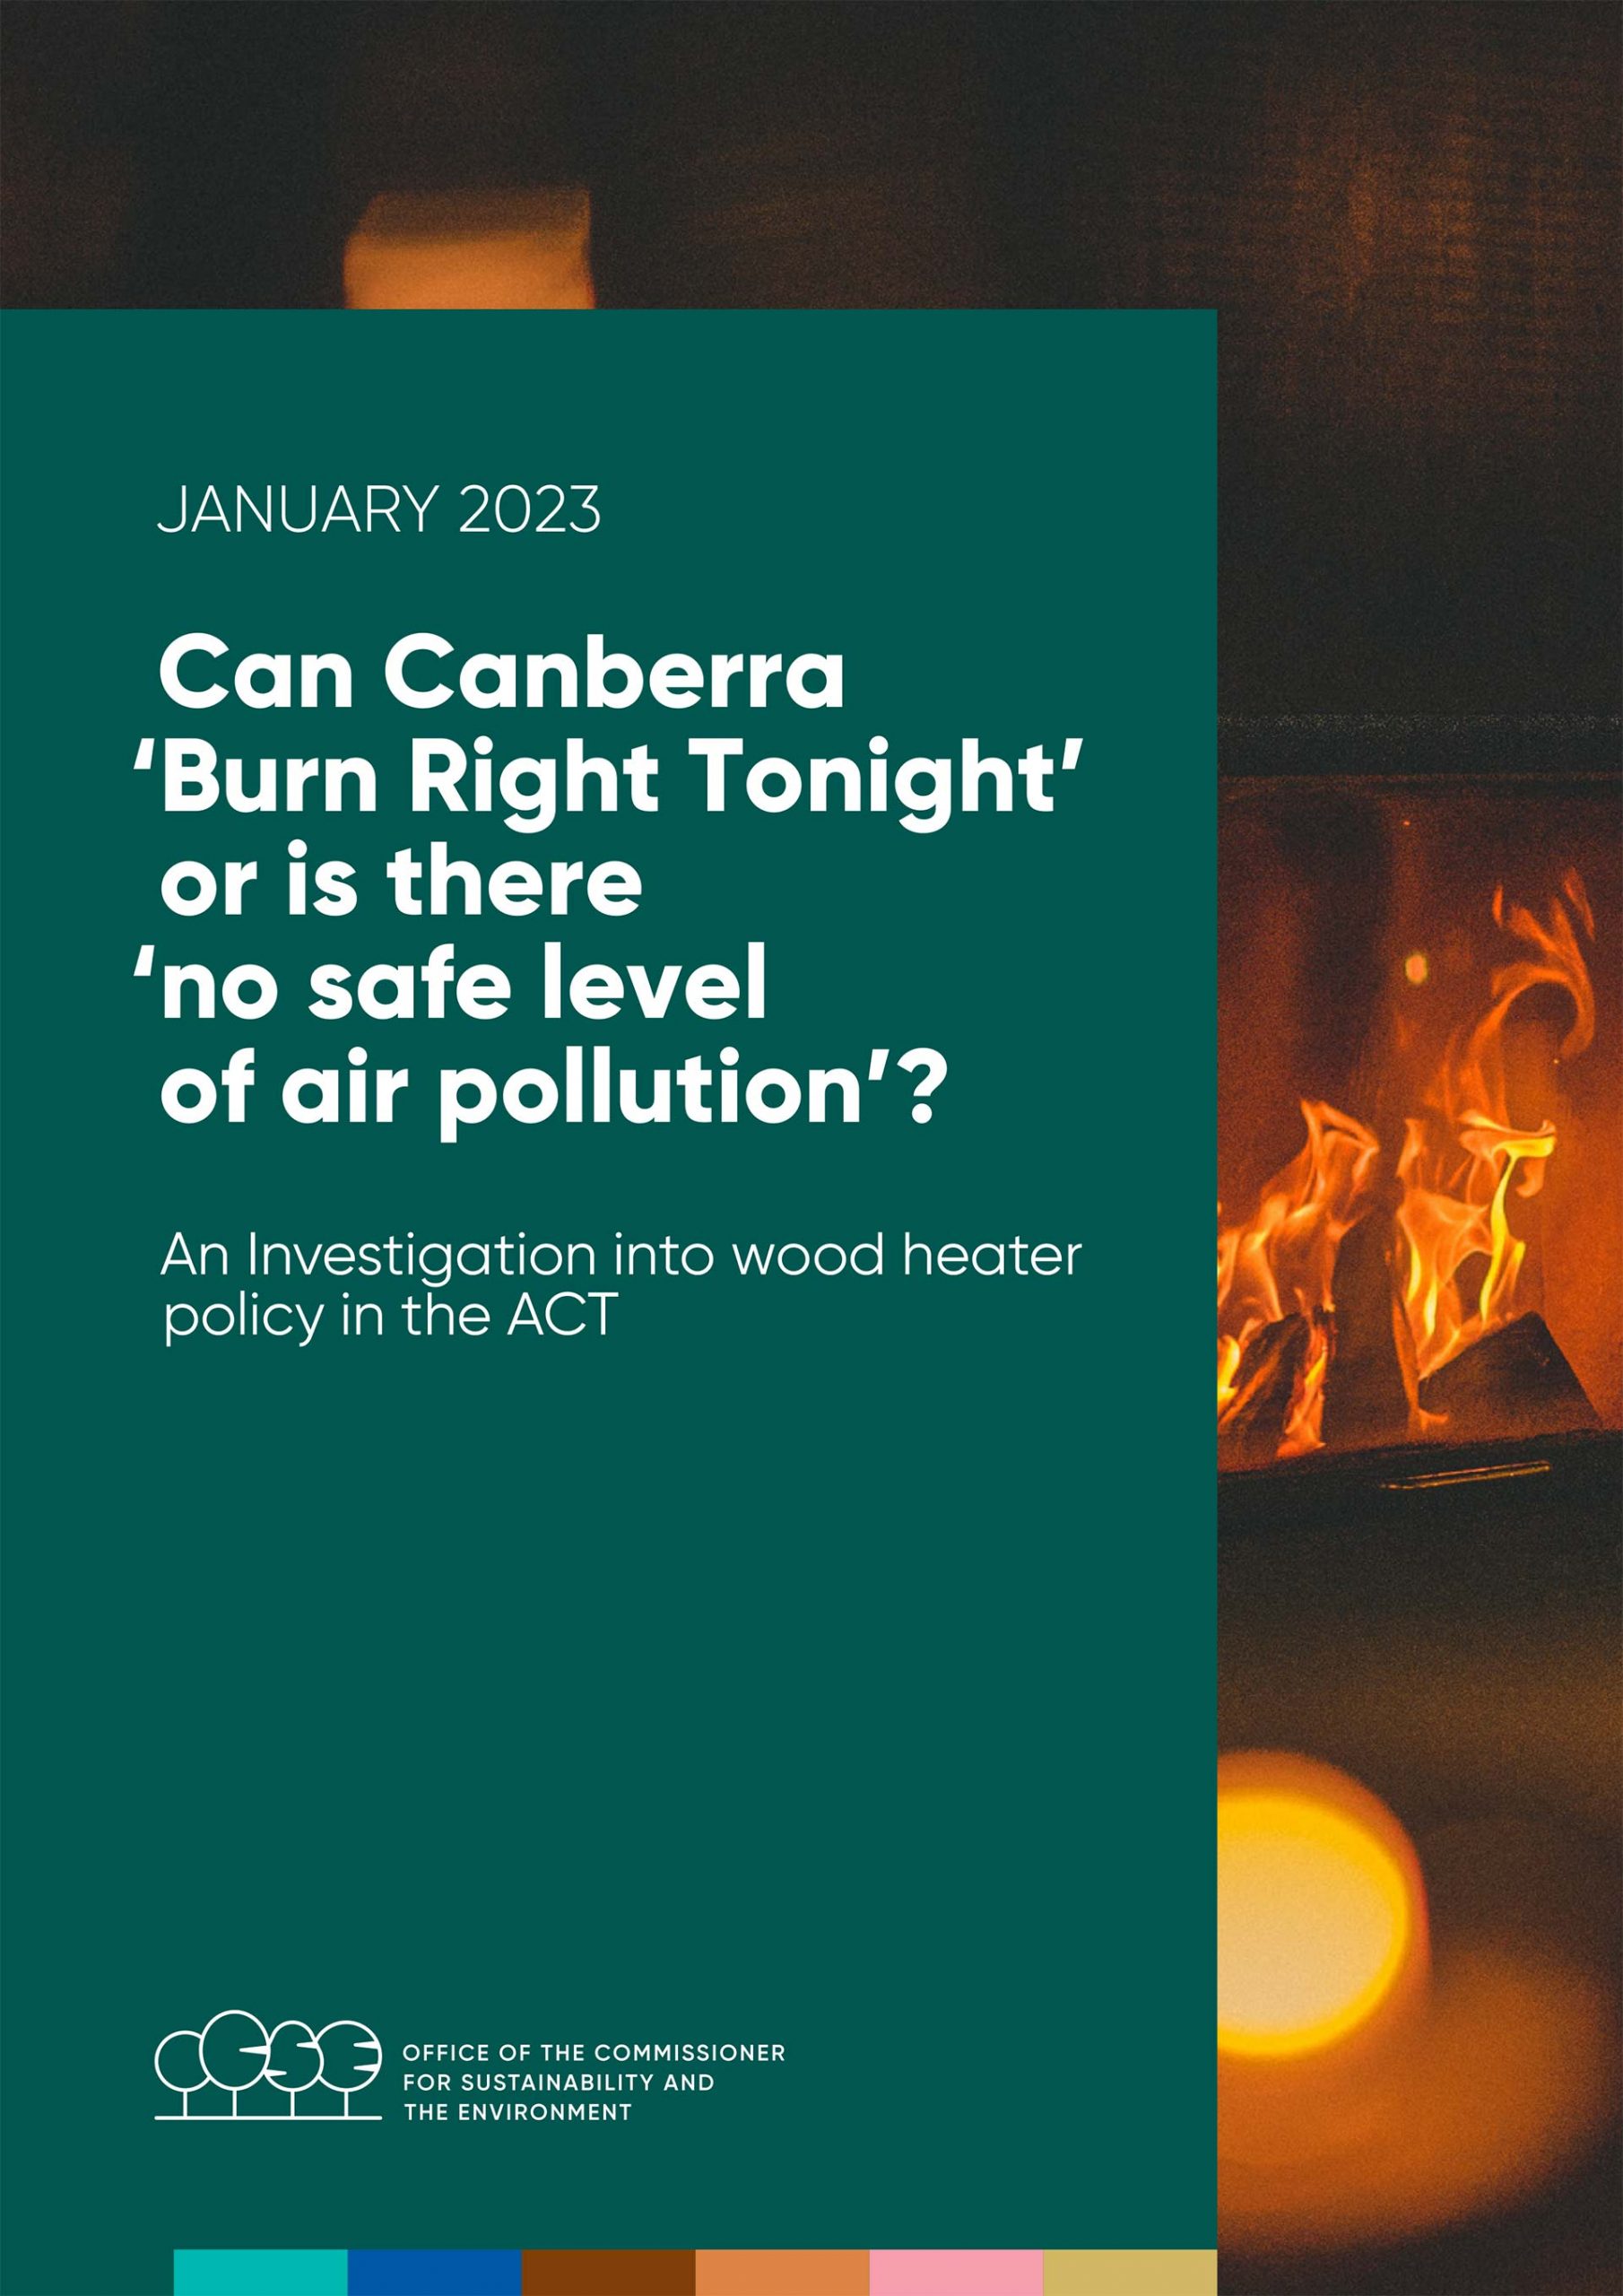 Wood Heaters and Woodsmoke Pollution in Canberra - Tuggeranong Community Council Submission